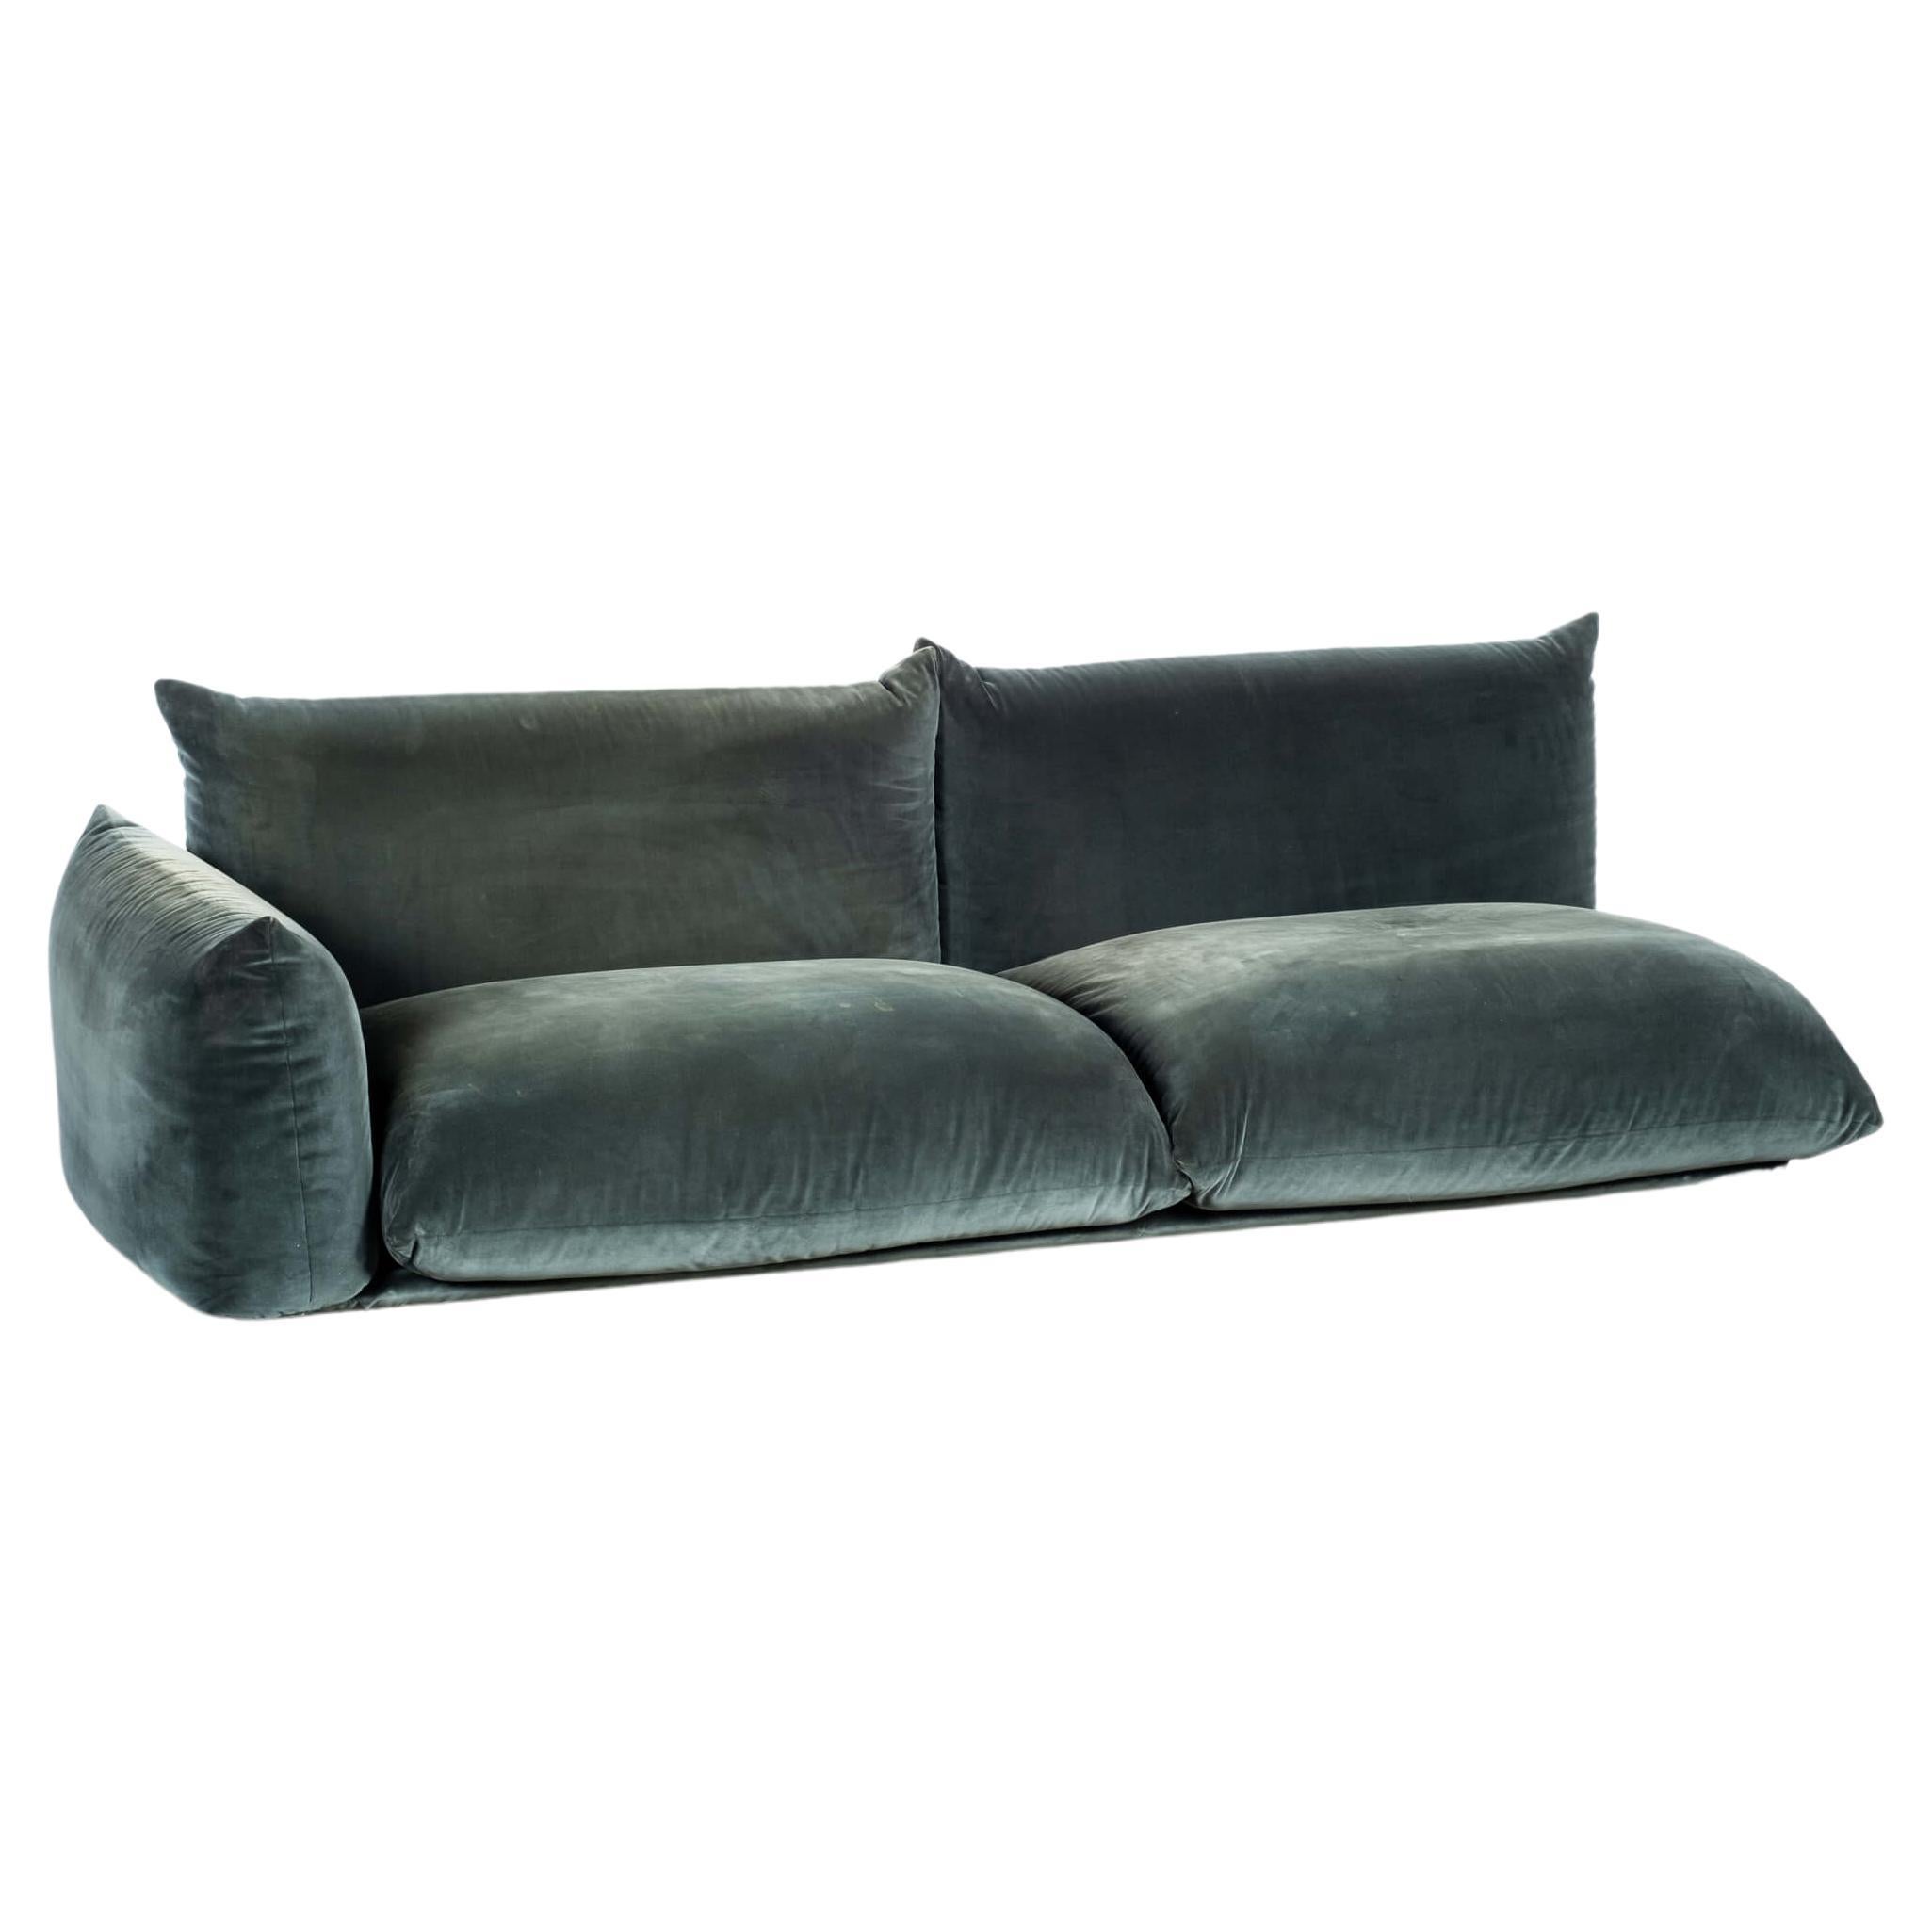 Marenco 1 Arm 2-Seater Sofa in Green Velvet by Mario Marenco For Sale